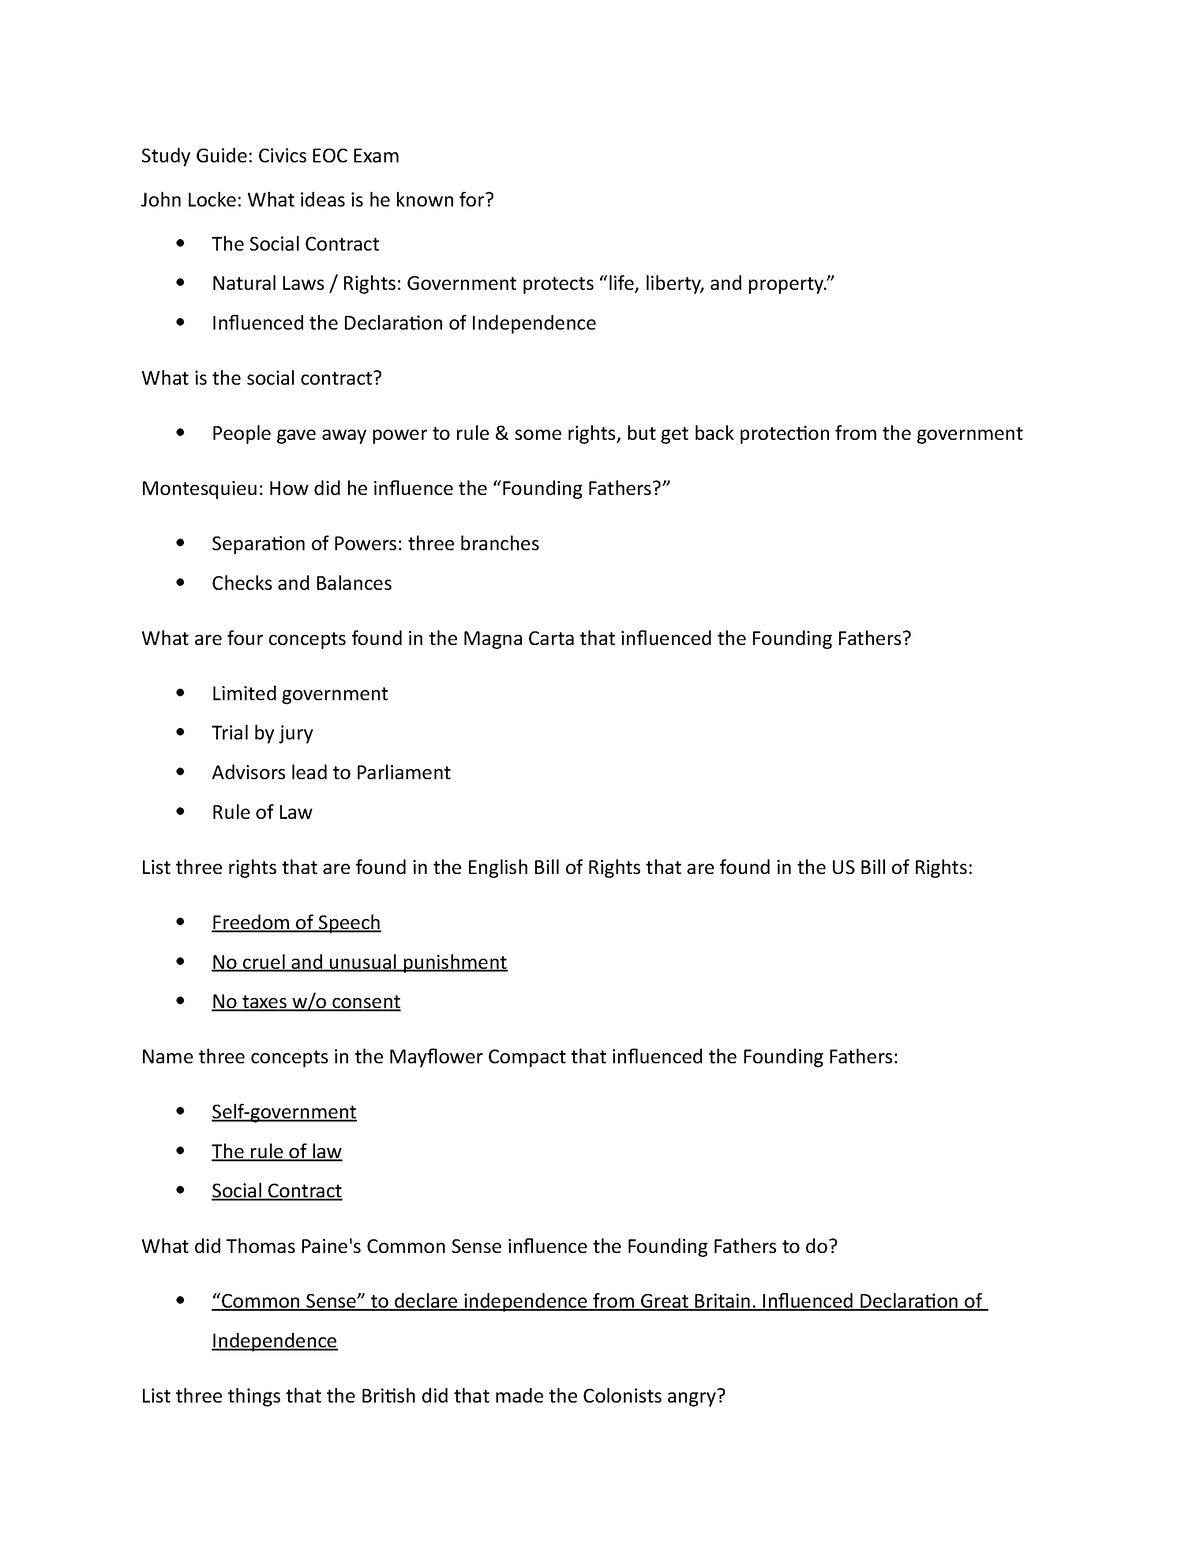 Study Guide Answer Key CIVICS EOC PRACTICE MATERIAL Study Guide